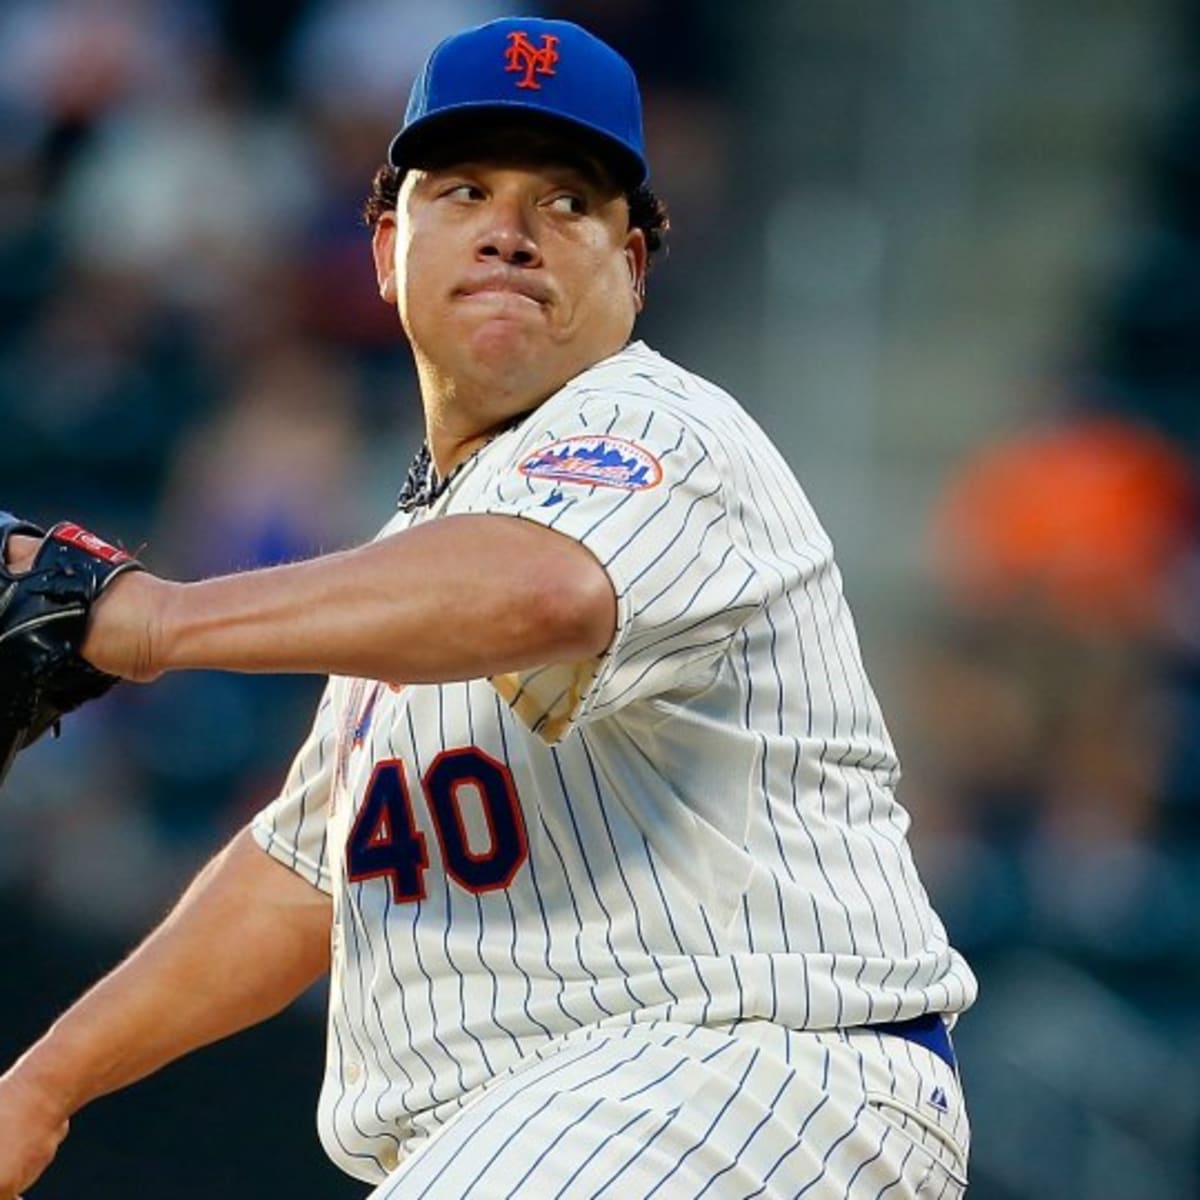 Bartolo Colon developed his strength pulping thousands of crates